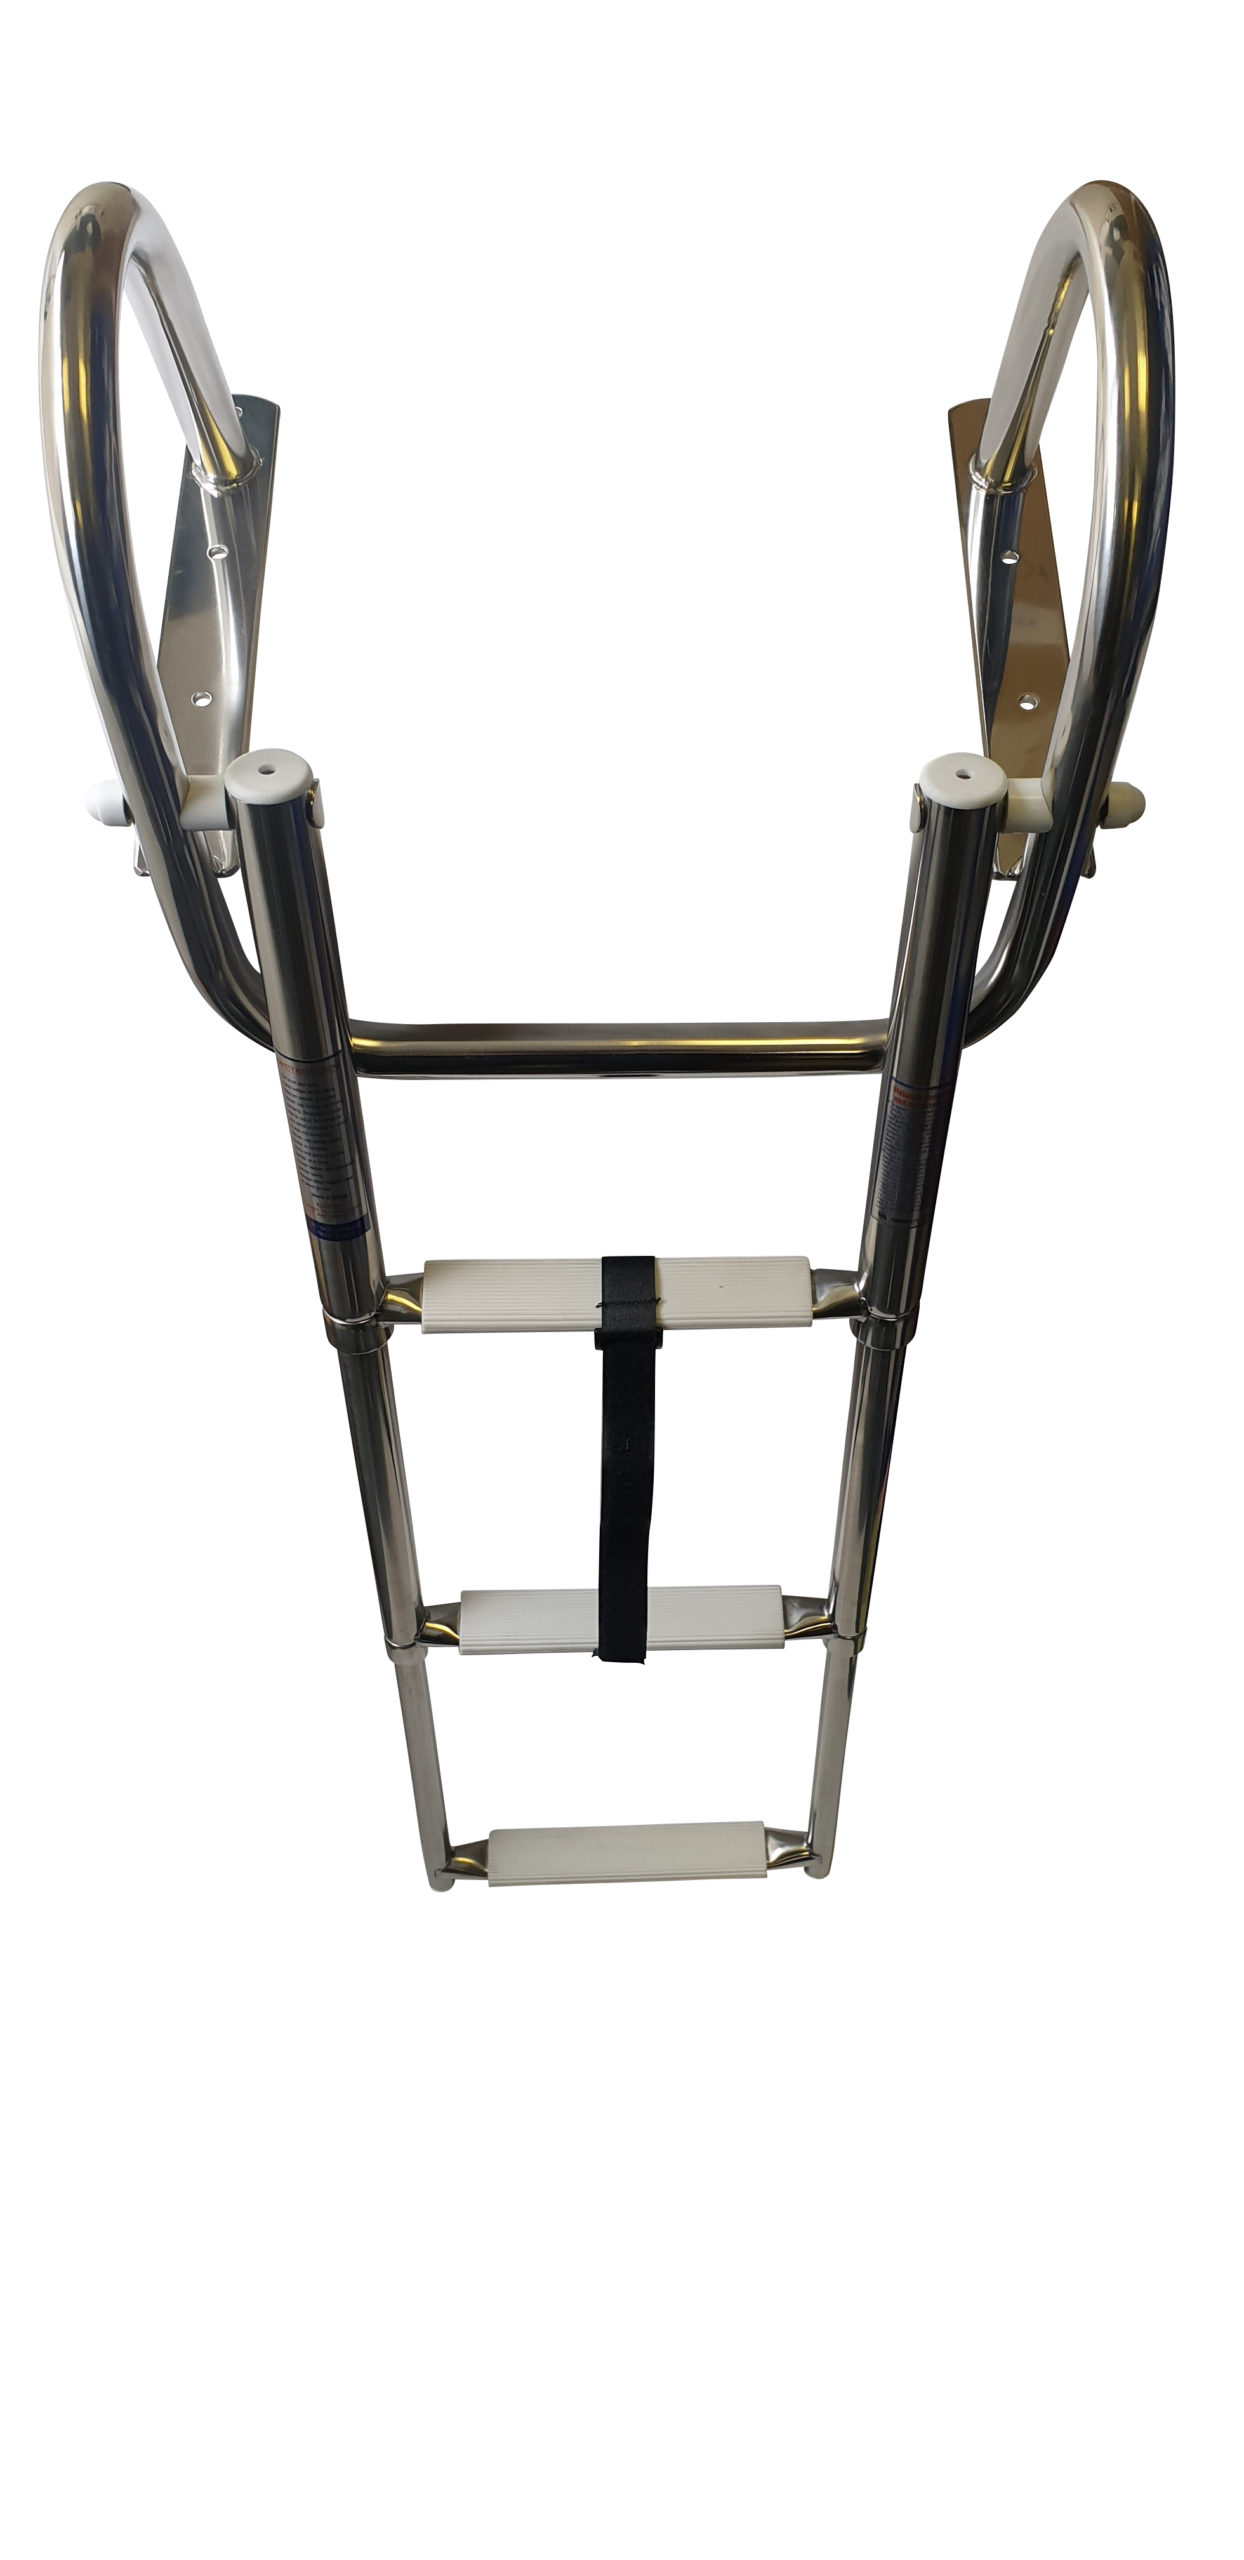 Stainless Steel Telescopic Ladder with Handles - 3 Steps